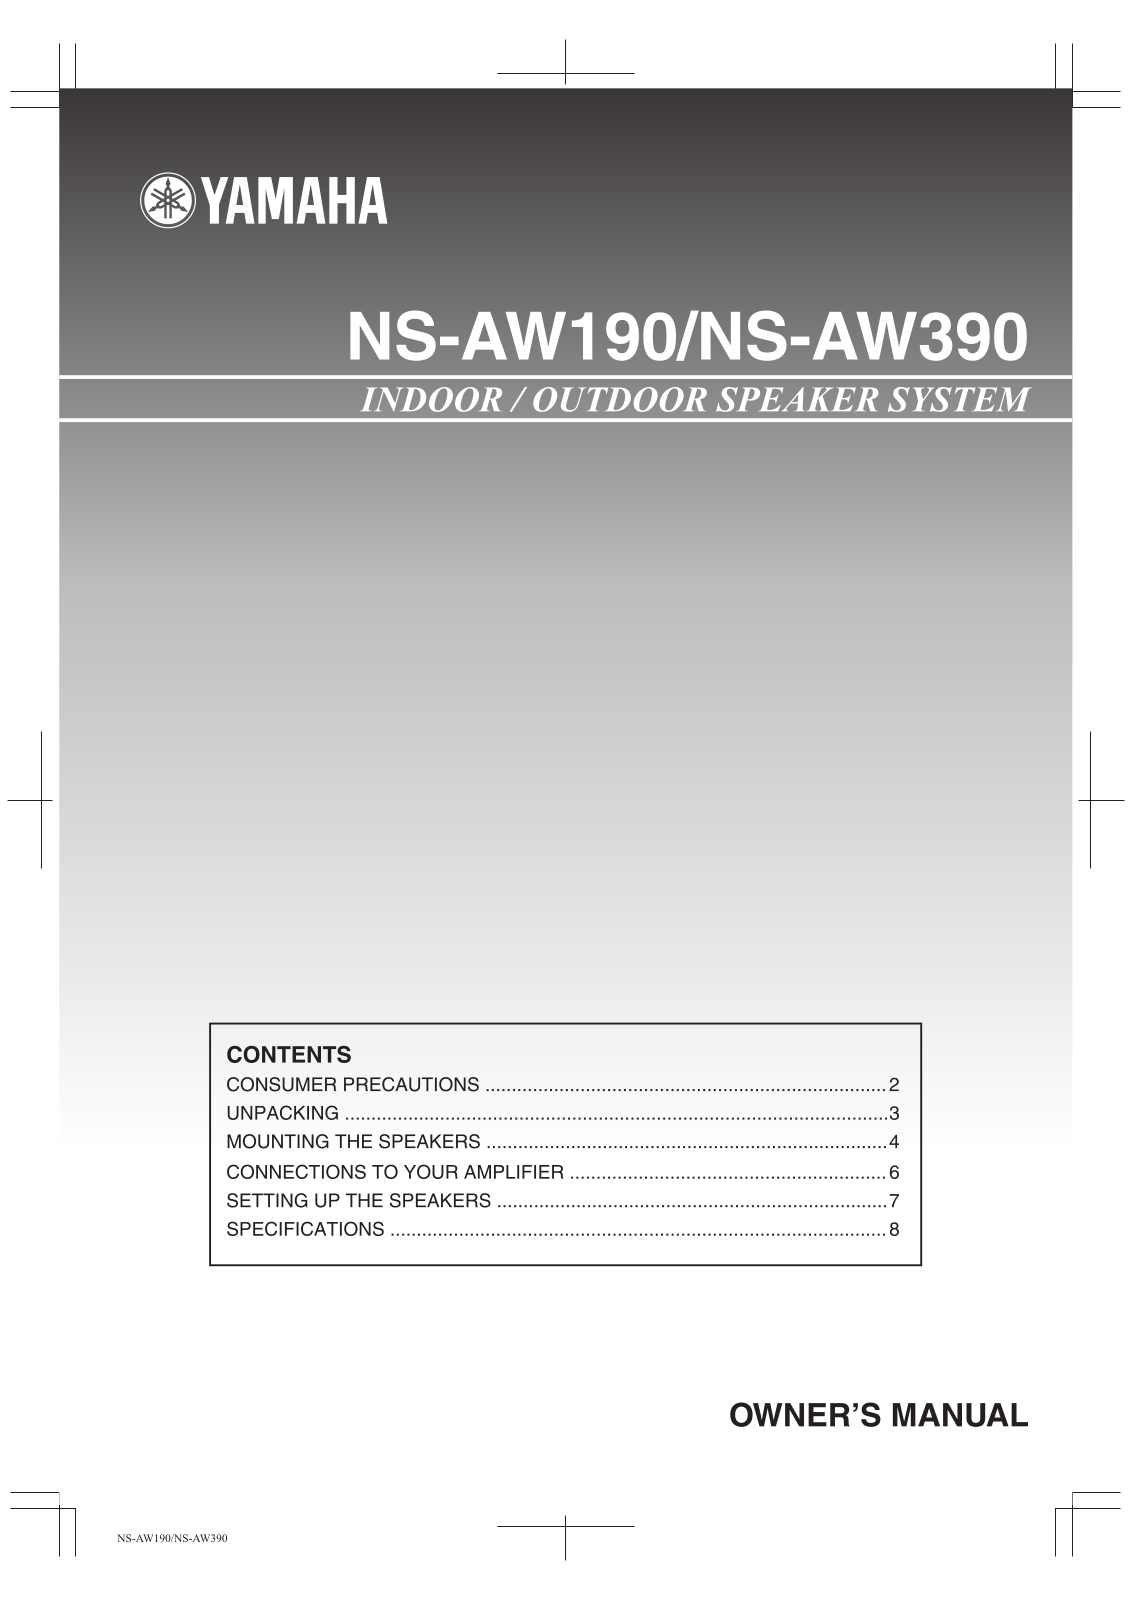 Yamaha NS-AW190W, NS-AW390W, AW190 - NS Speaker - 35 Watt, NS-AW190BL, NS-AW190WH Owner's Manual